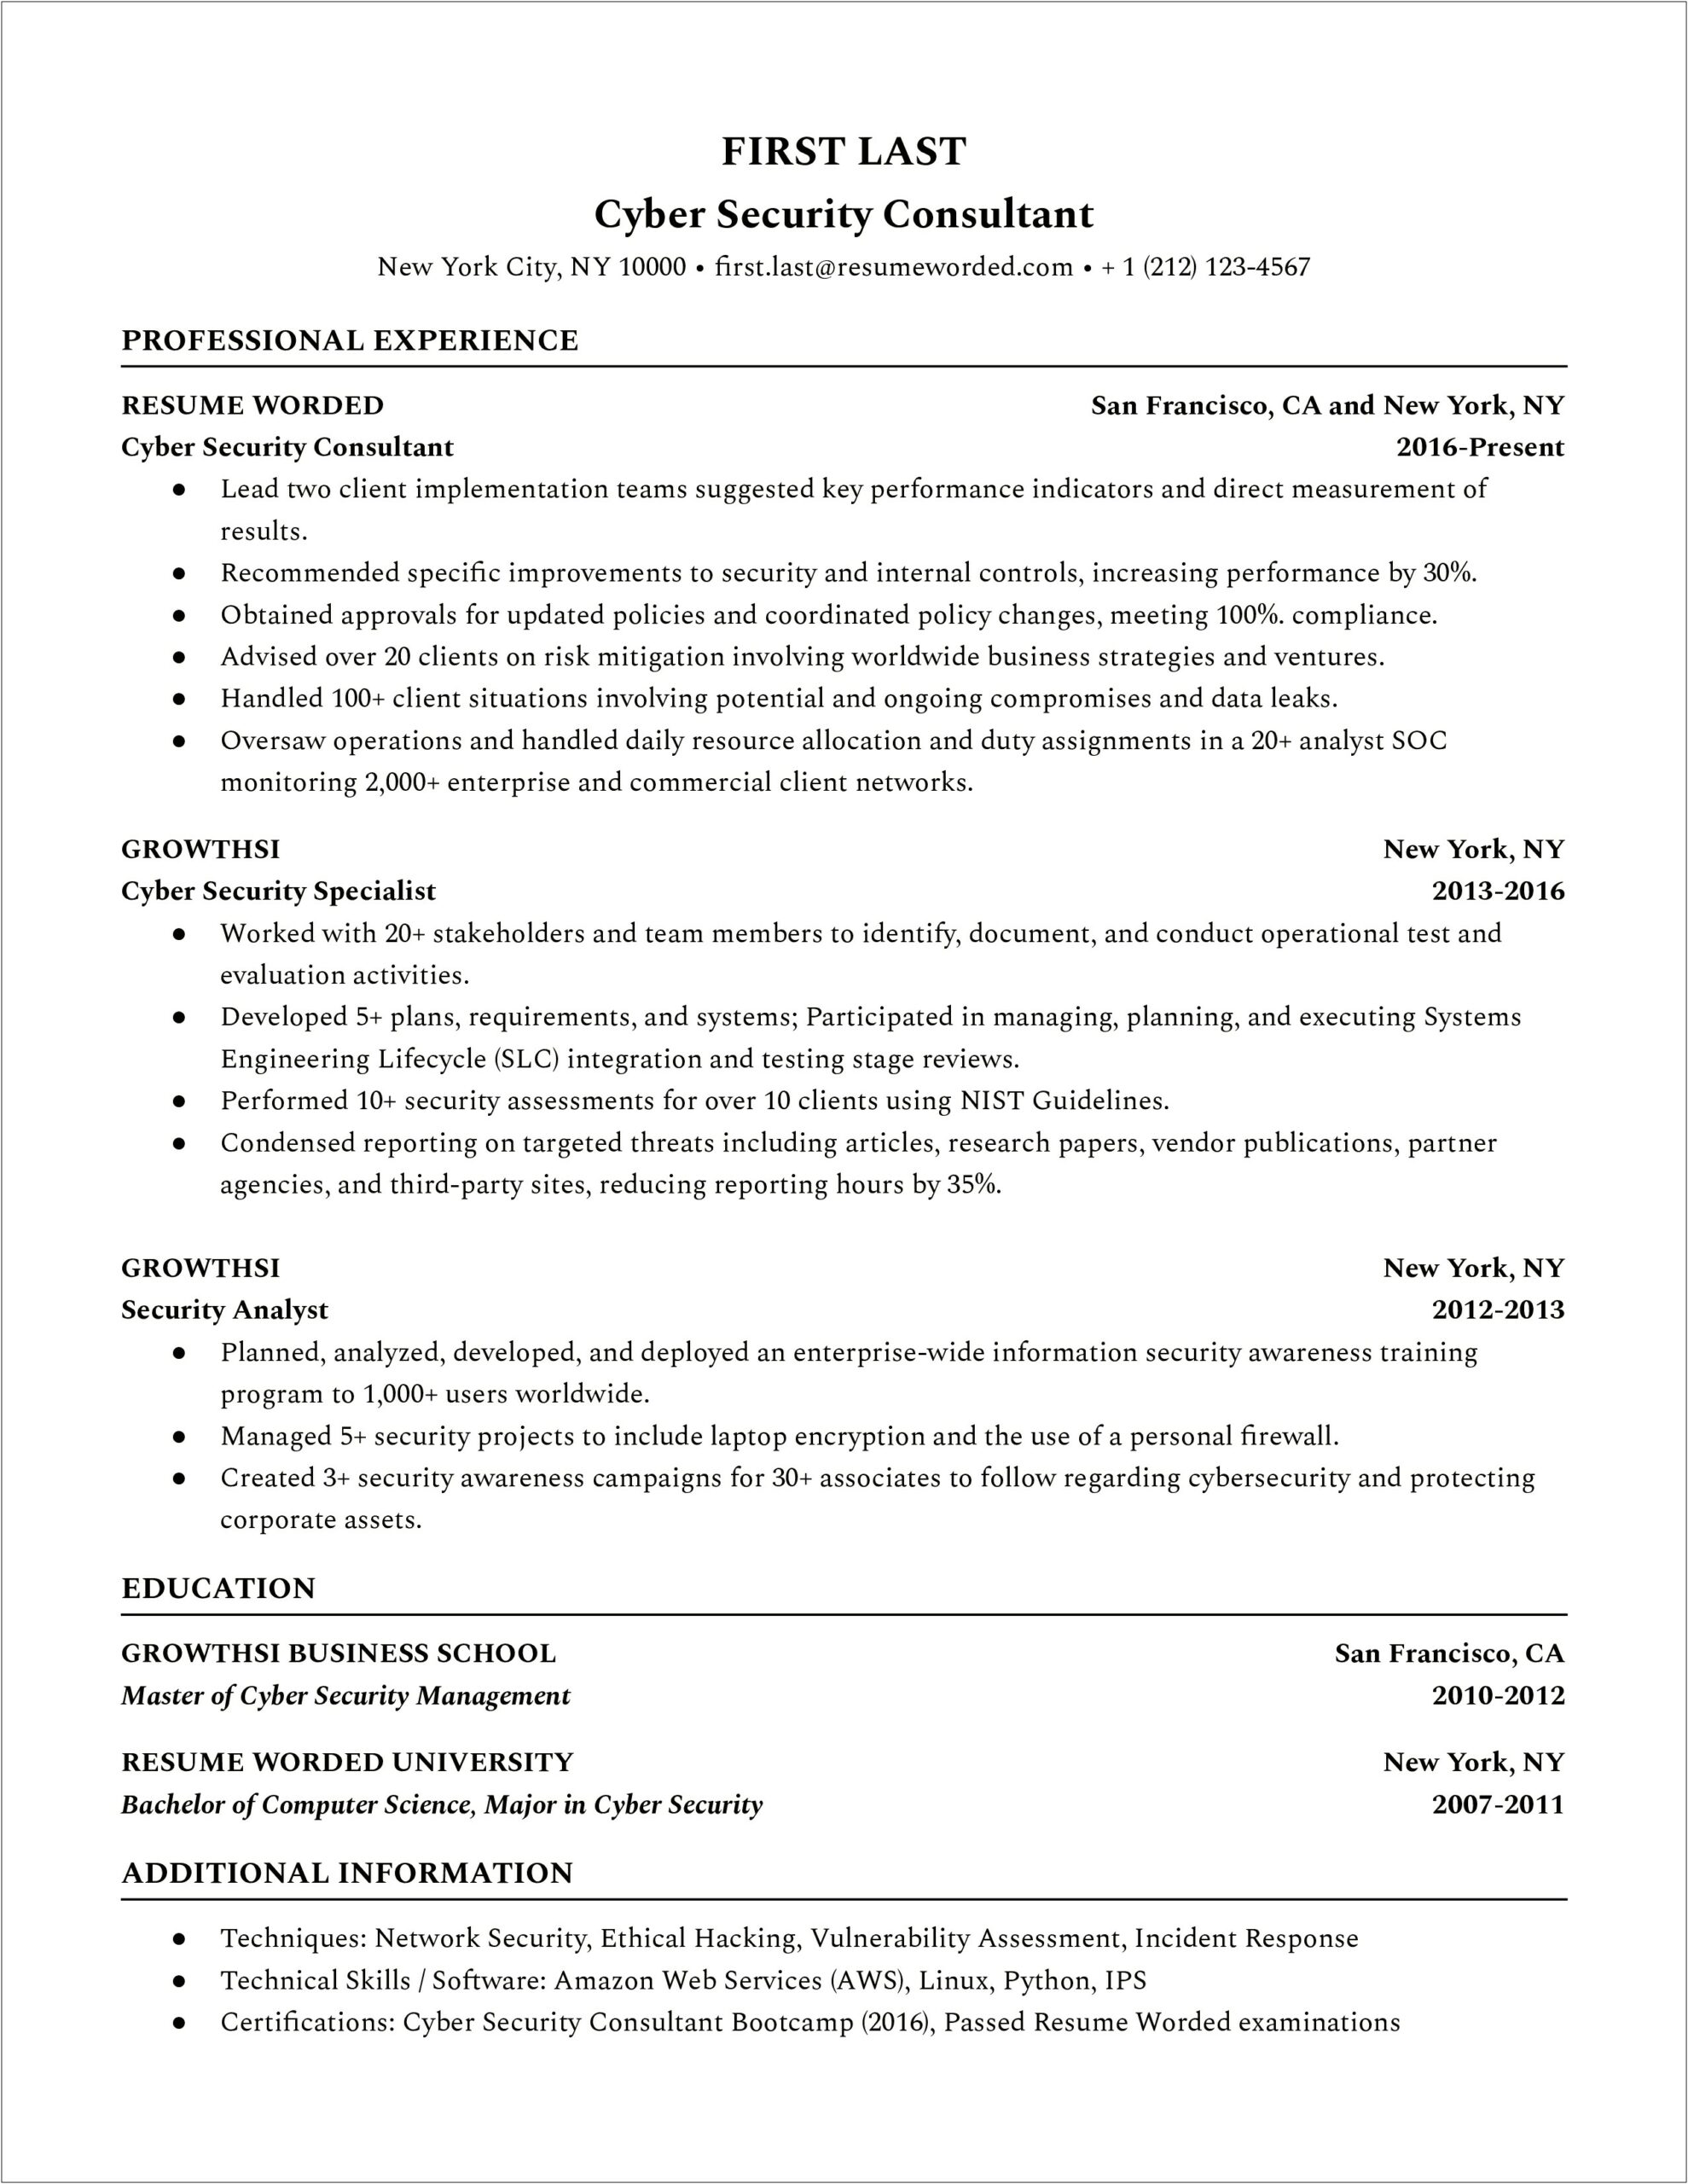 Examples Of Recent College Graduate Cybersecurity Resumes